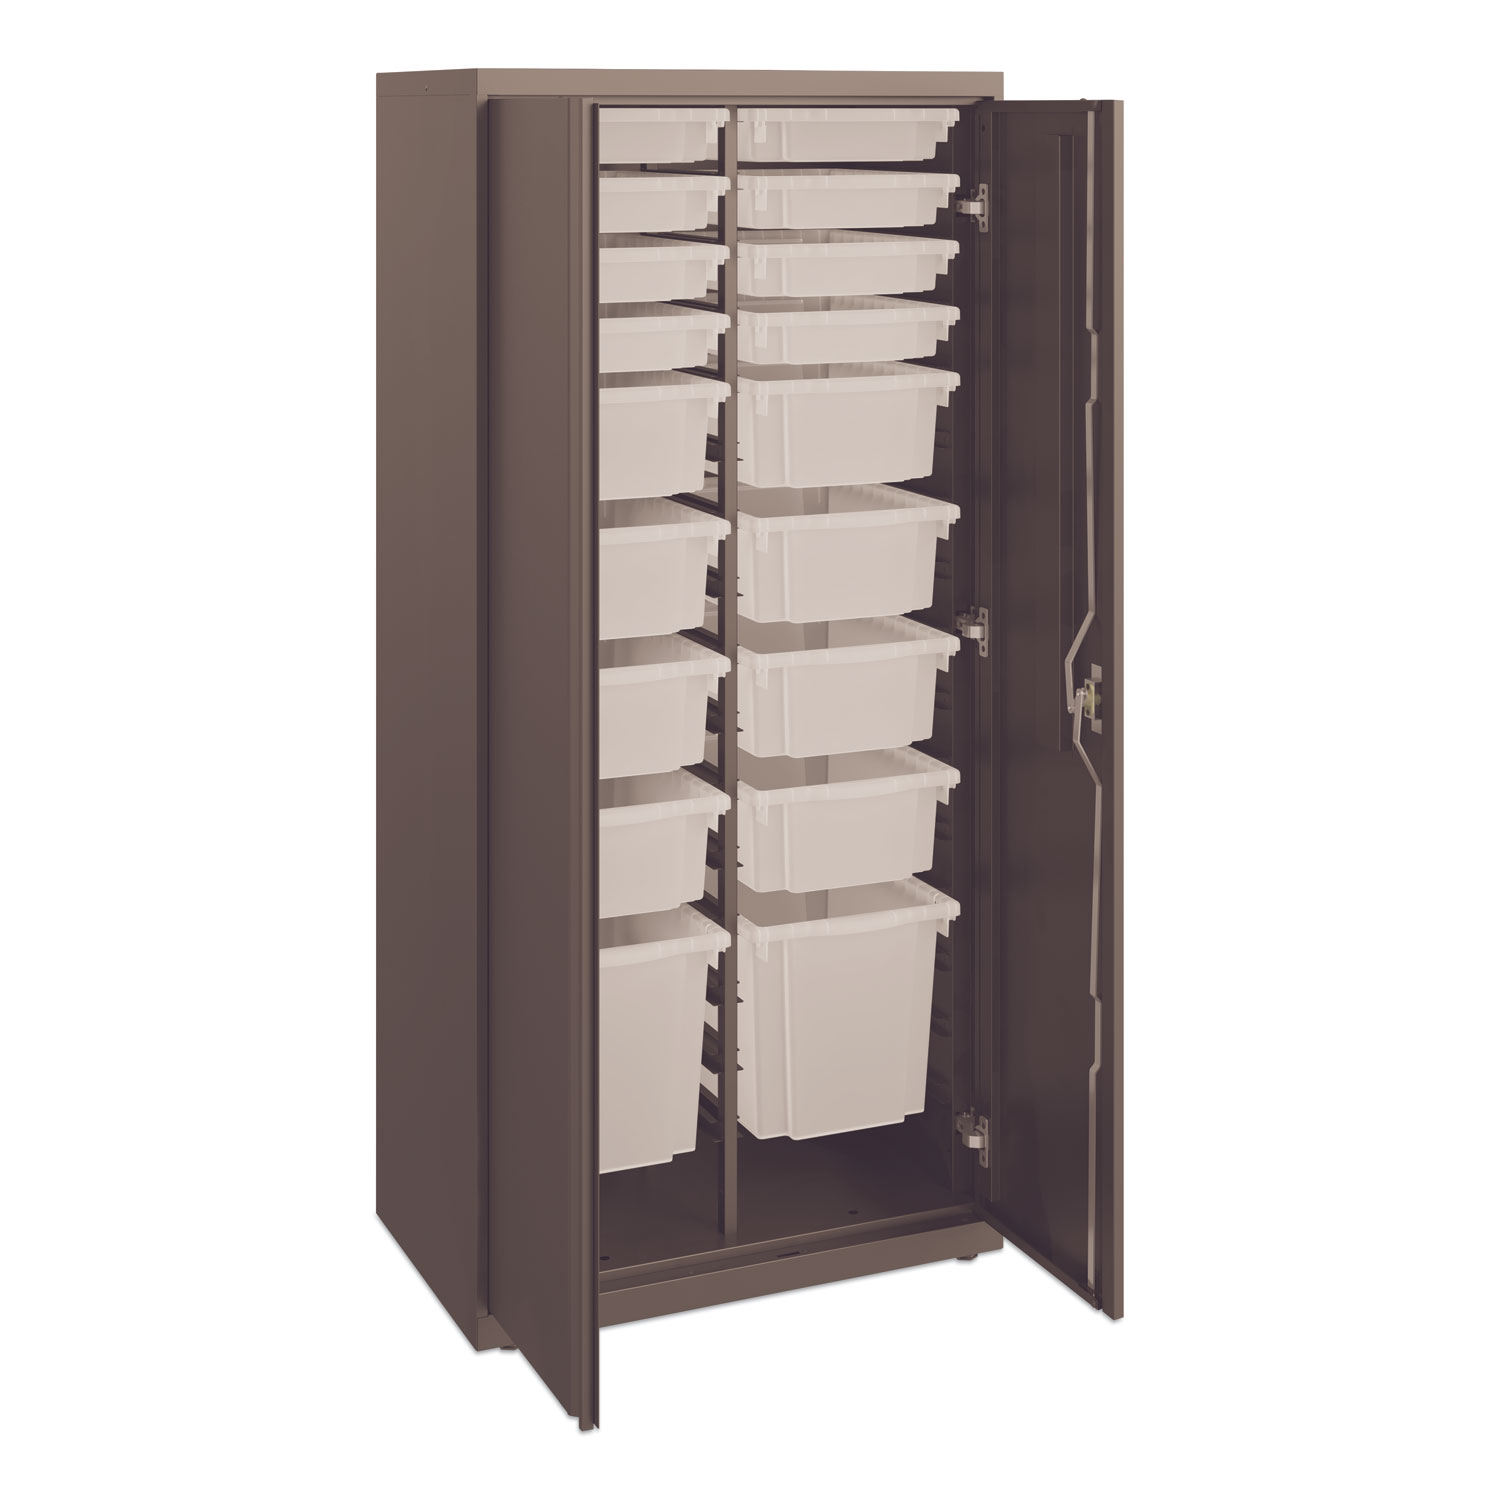  HON HONSC186430LGS Flagship Storage Cabinet with 8 Small, 8 Medium and 2 Large Bins, 30 x 18 x 64.25, Charcoal (HONSC186430LGS) 